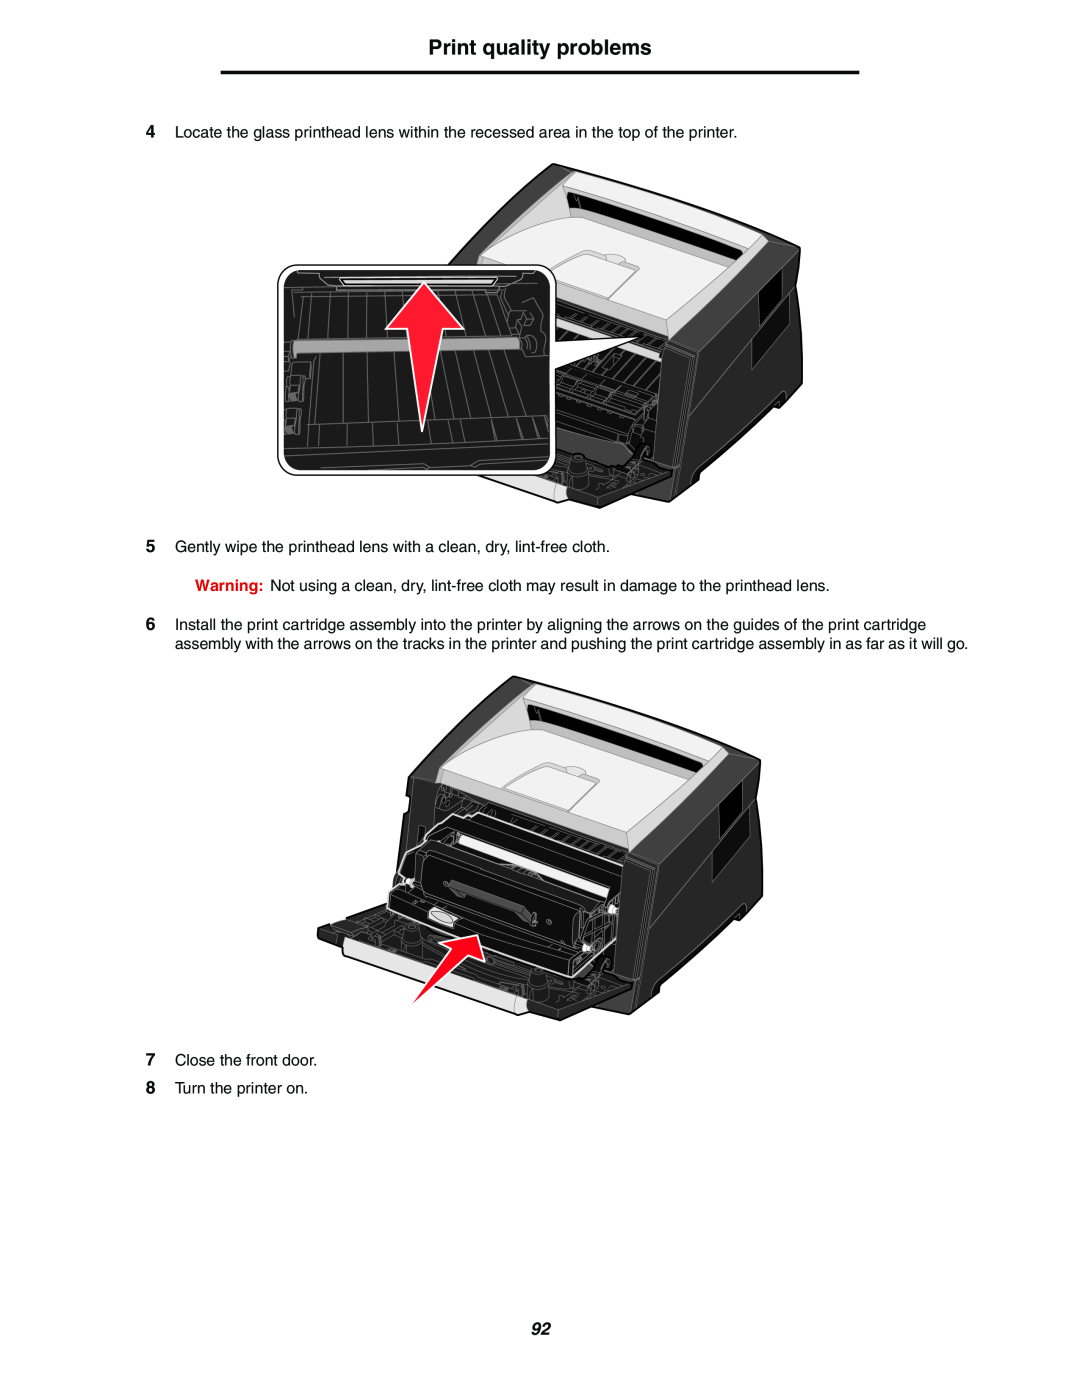 Lexmark 250dn manual Print quality problems, Gently wipe the printhead lens with a clean, dry, lint-free cloth 